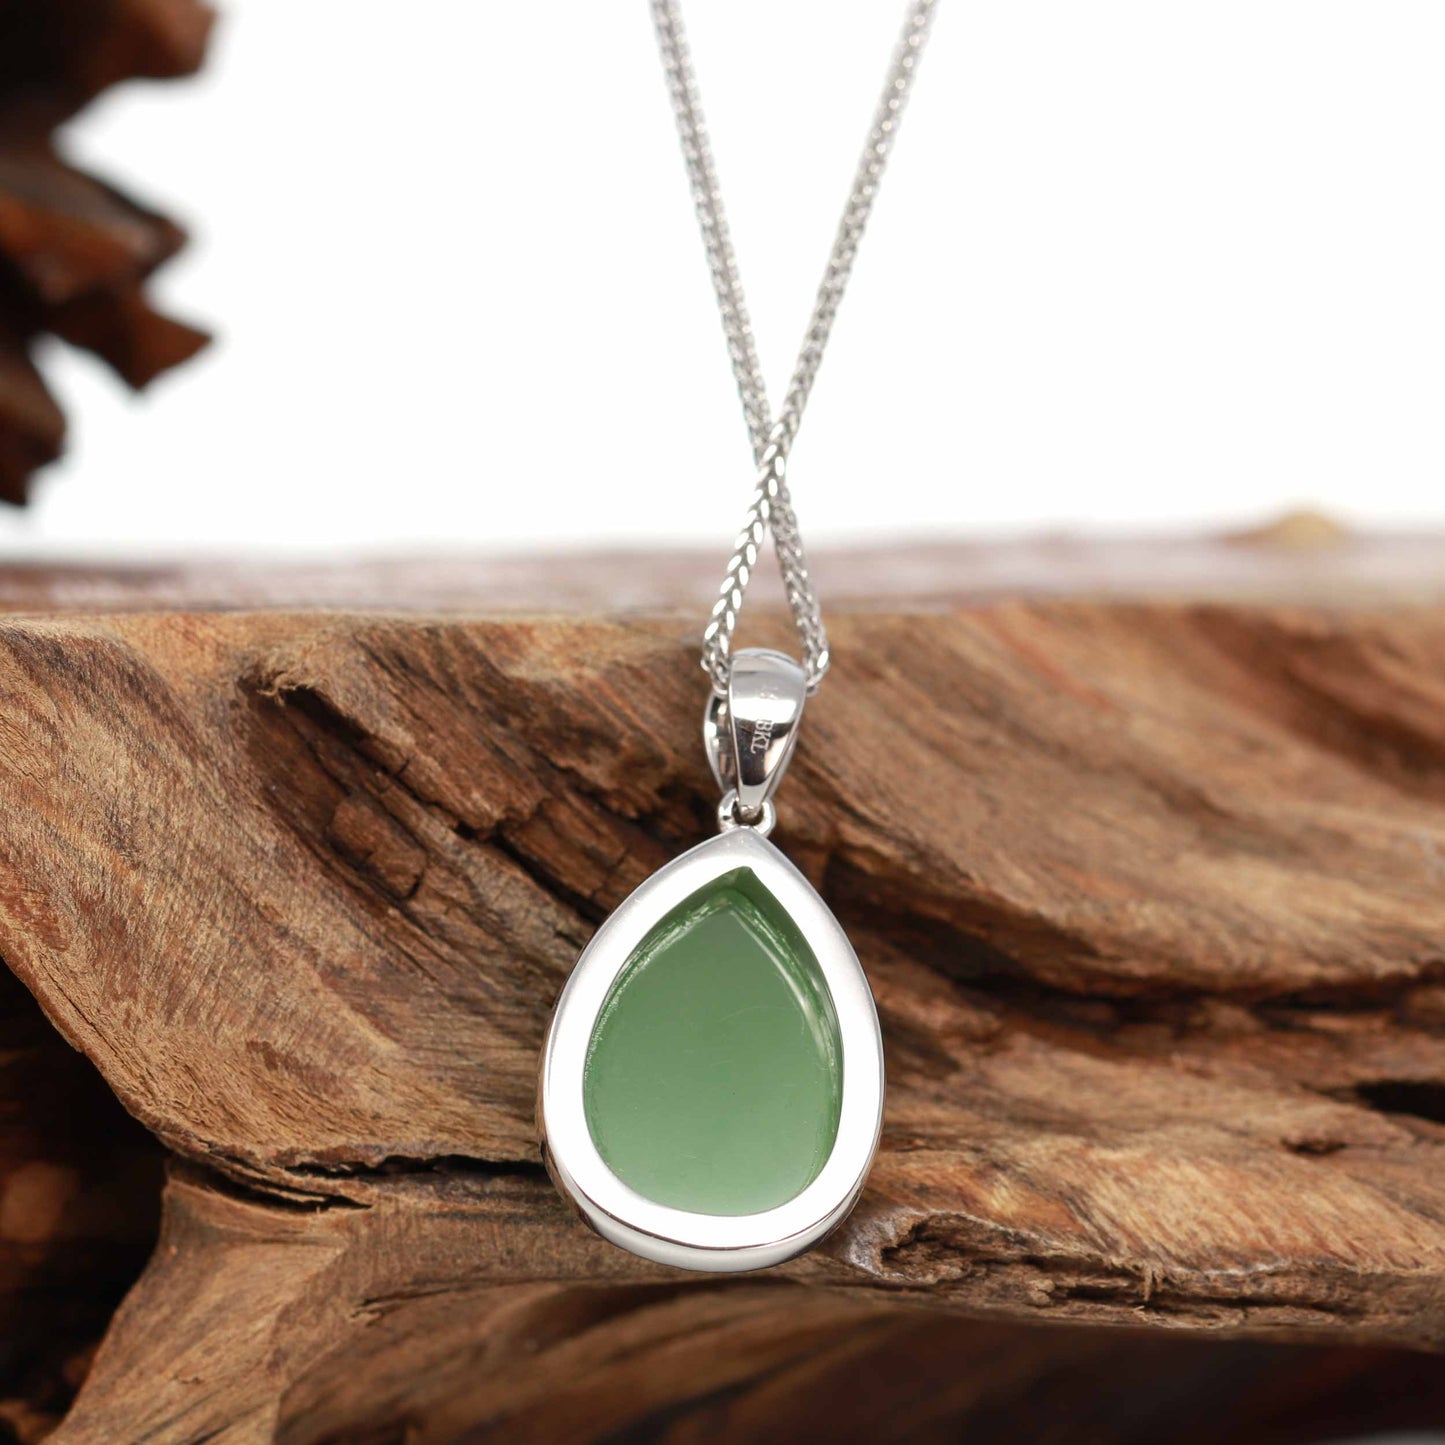 Load image into Gallery viewer, RealJade® Co. Natural Nephrite Jade Necklace With Gold www.realjade.com genuine jade Happy Valley Oregon
